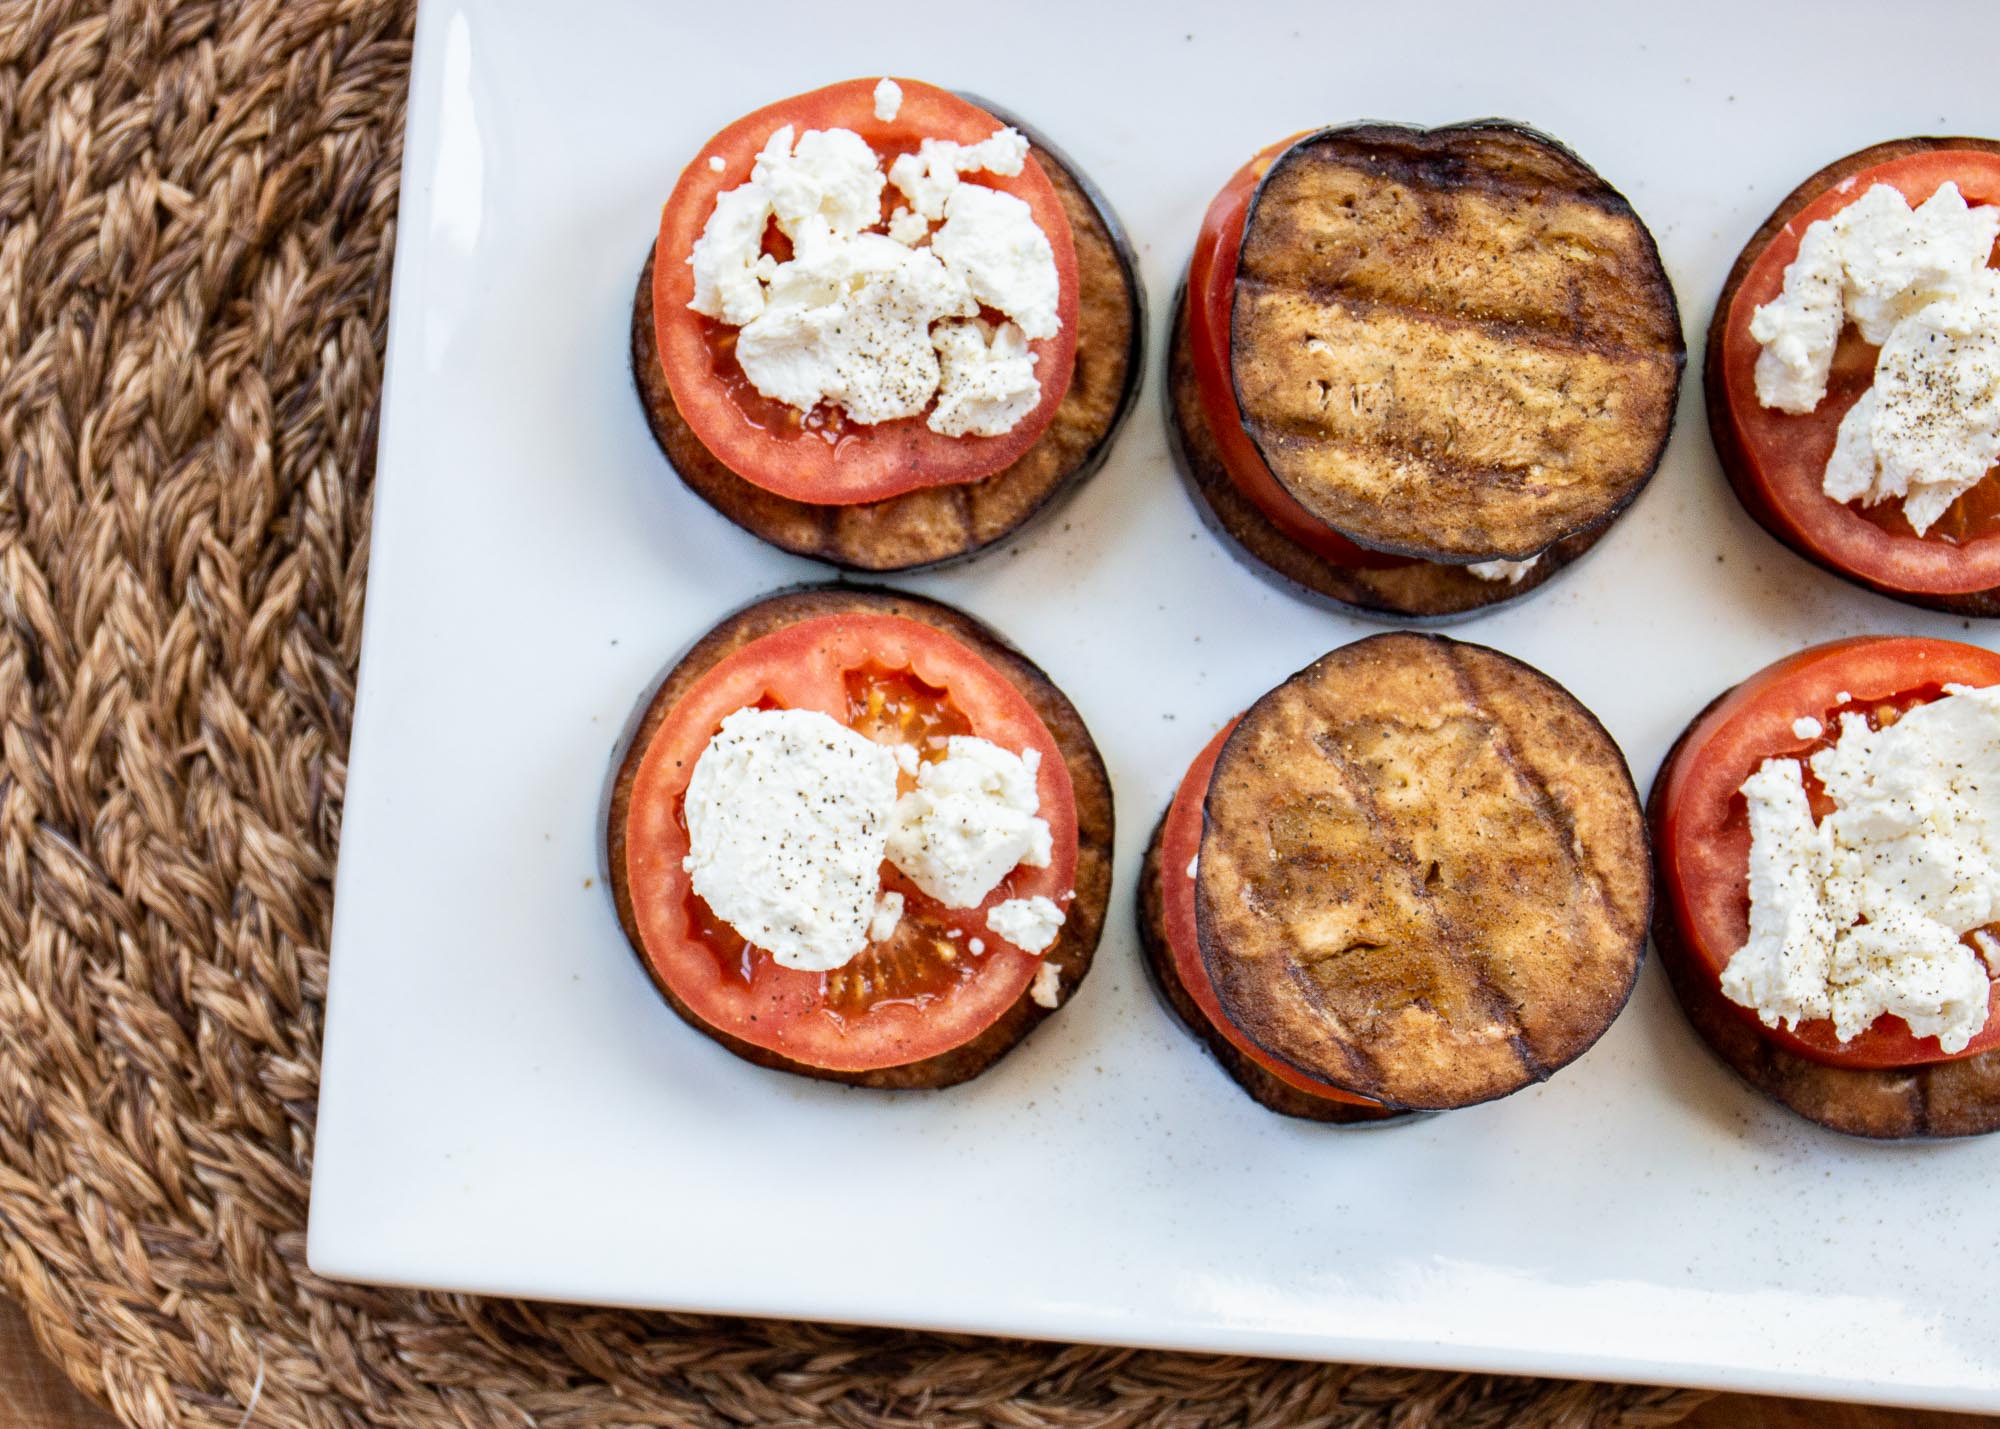 Grilled Eggplant, Tomato and Goat Cheese